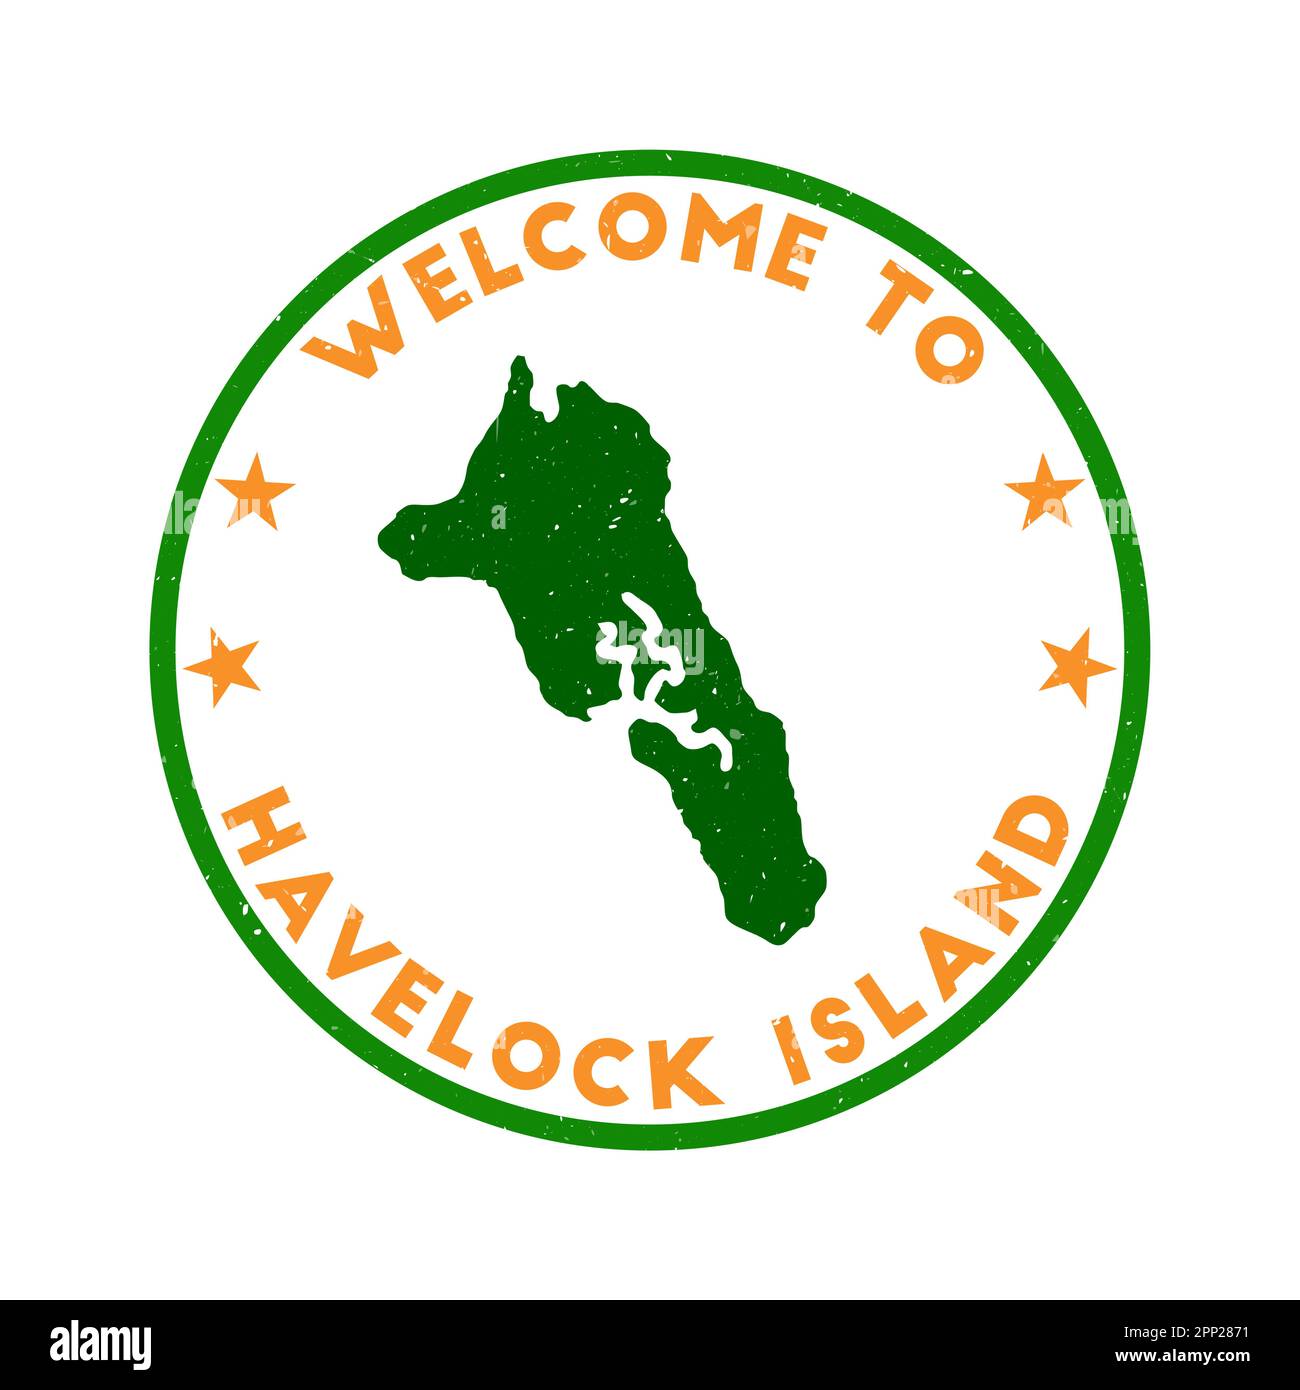 Welcome to Havelock Island stamp. Grunge island round stamp with texture in Mango Madness color theme. Vintage style geometric Havelock Island seal. A Stock Vector